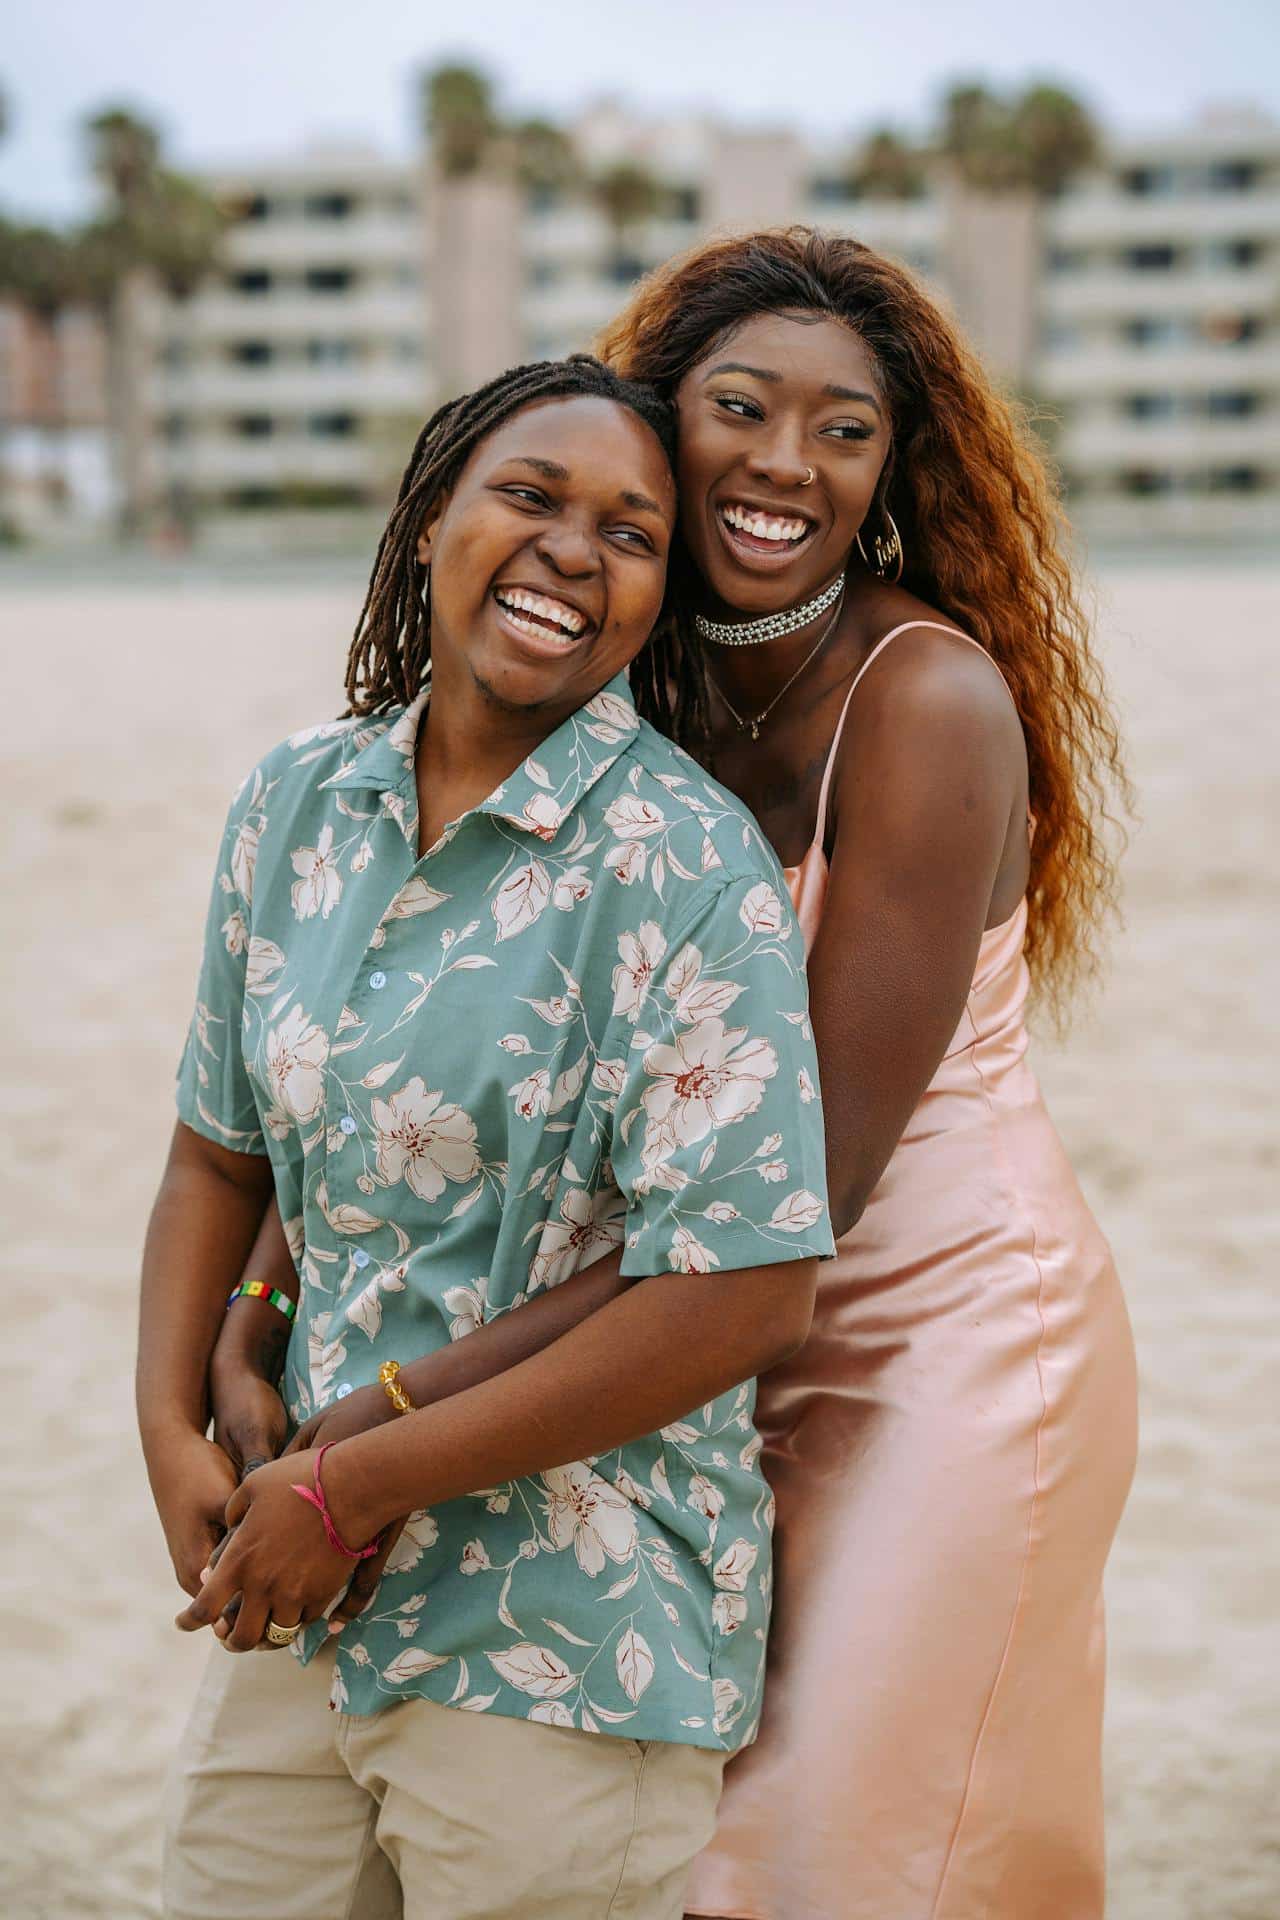 A Black lesbian couple poses together, looking happy. One is wearing a pink dress, the other is wearing a blue button up shirt with floral print. The beach can be seen blurred in the background.